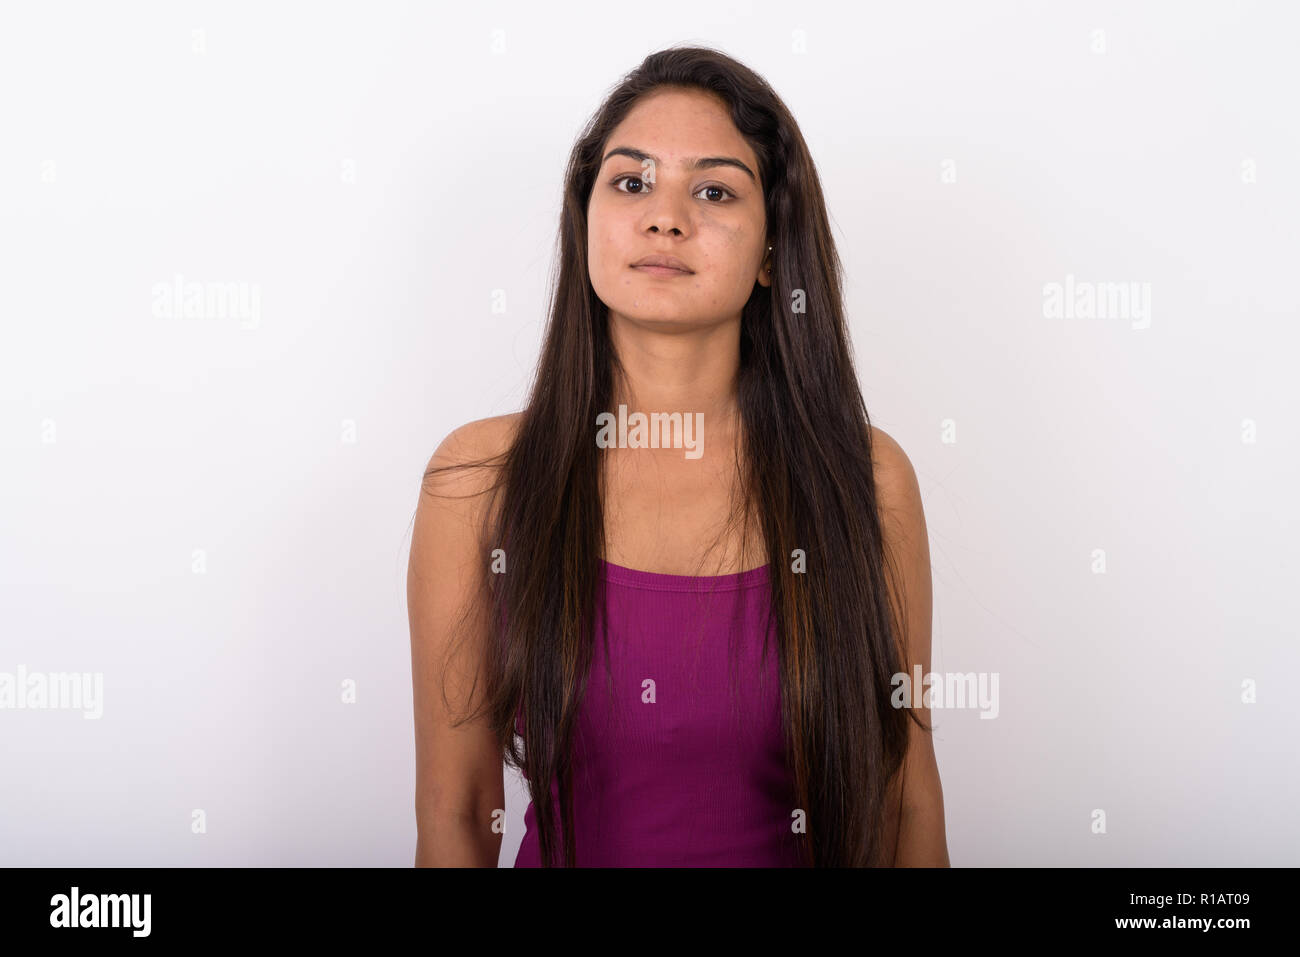 Studio shot of young Indian woman wearing sleeveless against whi Stock Photo